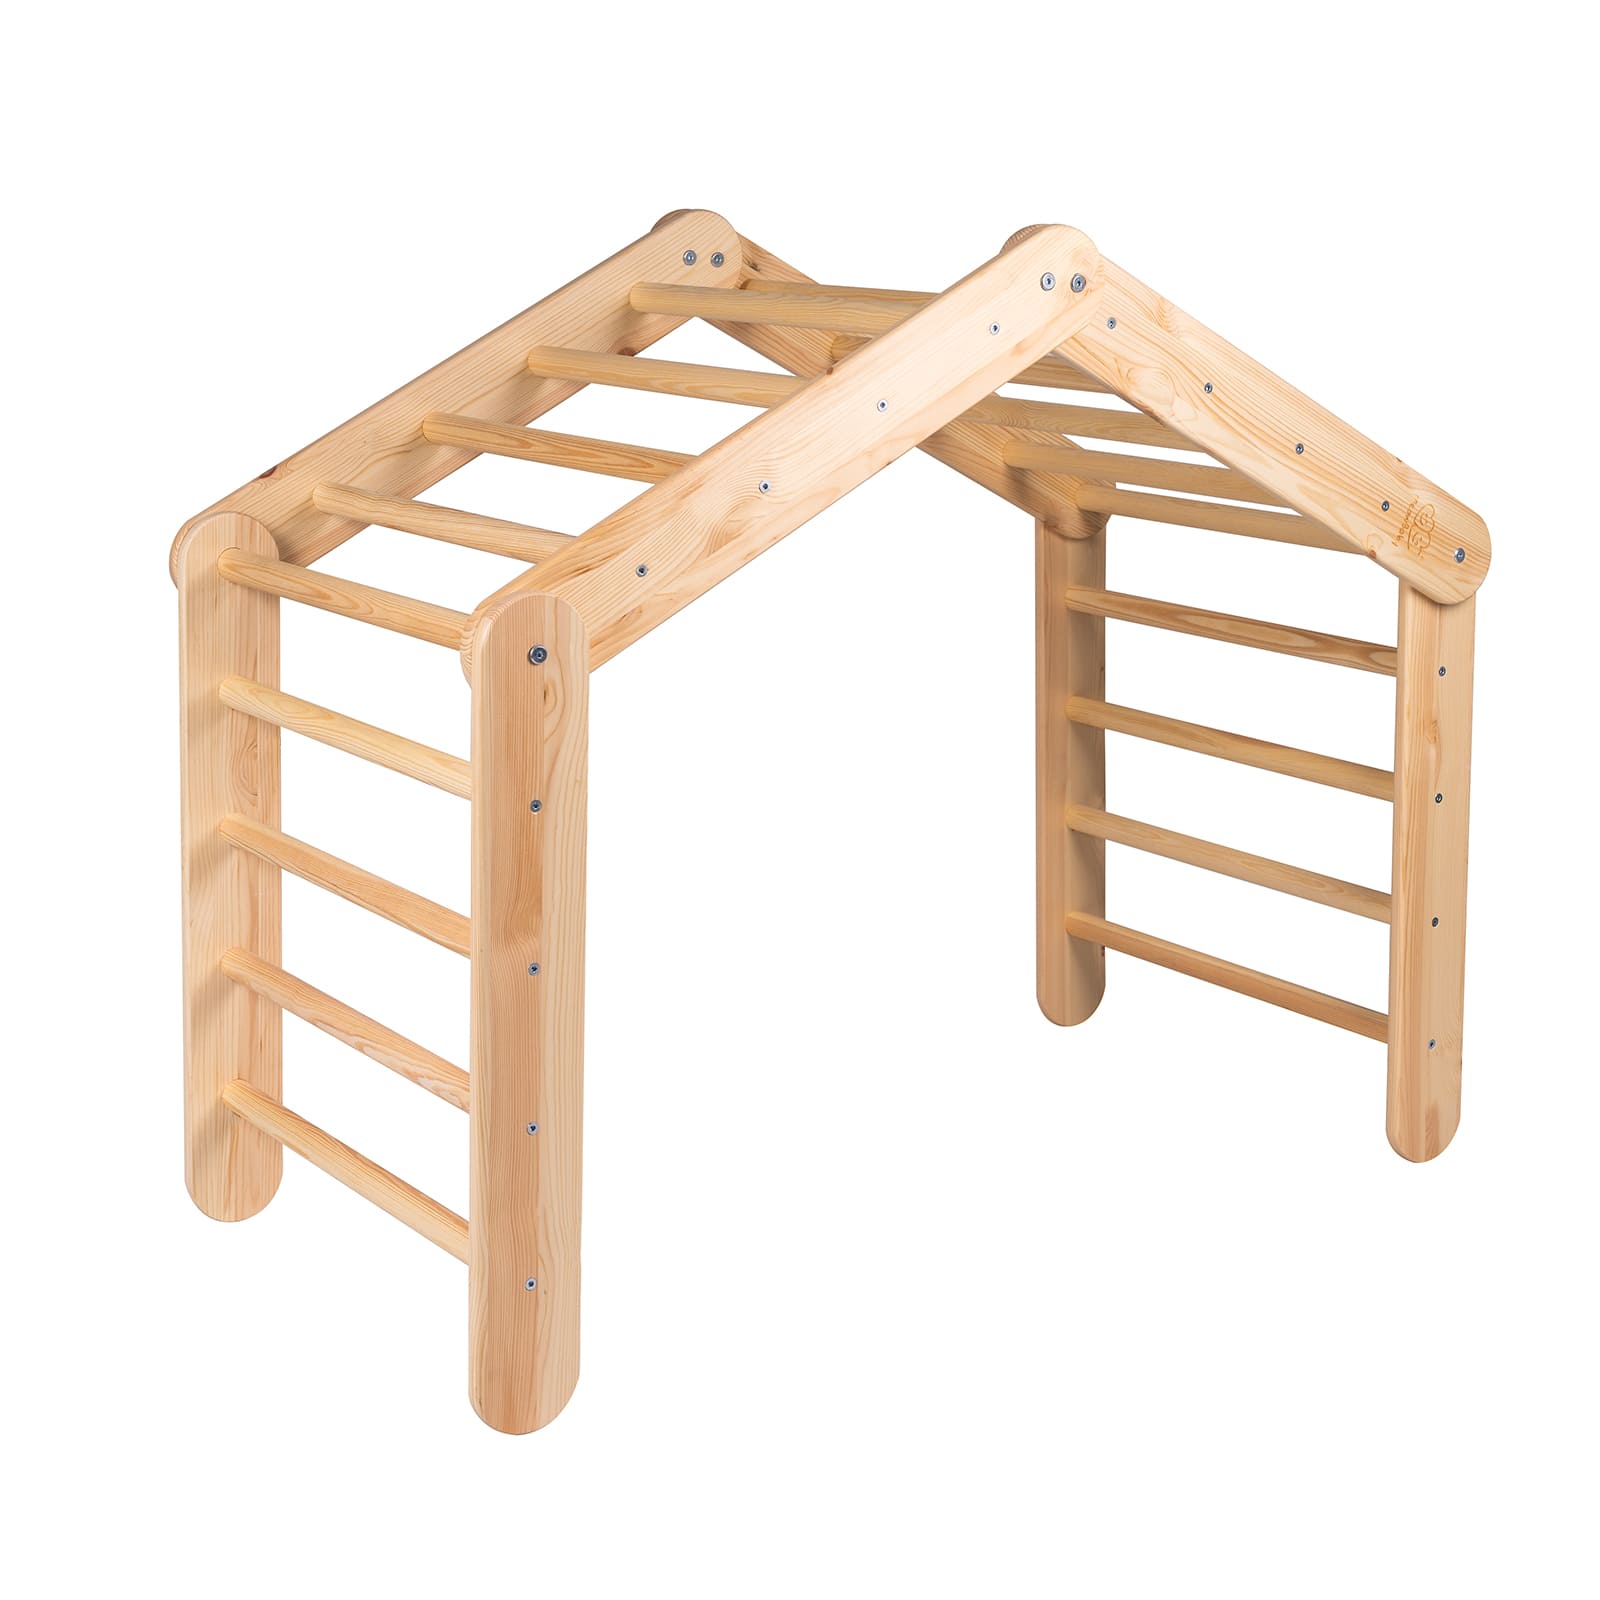 Wooden Pikler Large Climbing Triangle For Kids By MeowBaby - Stylemykid.com